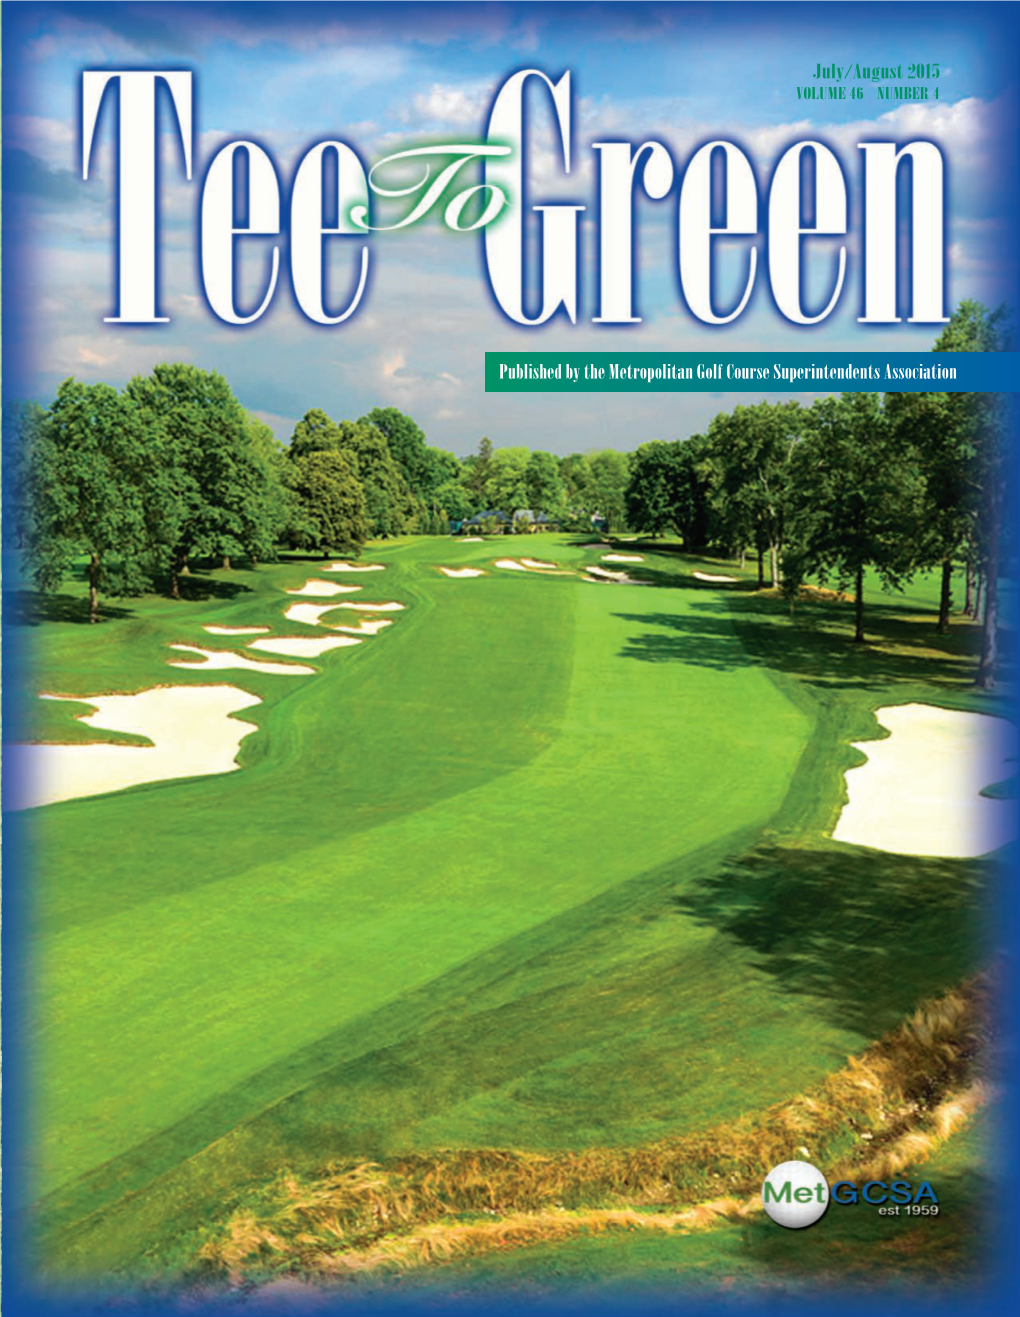 Tee to Green August 2015 Vr 2 Tee to Green Dec 2010 9/14/15 8:11 AM Page Ii